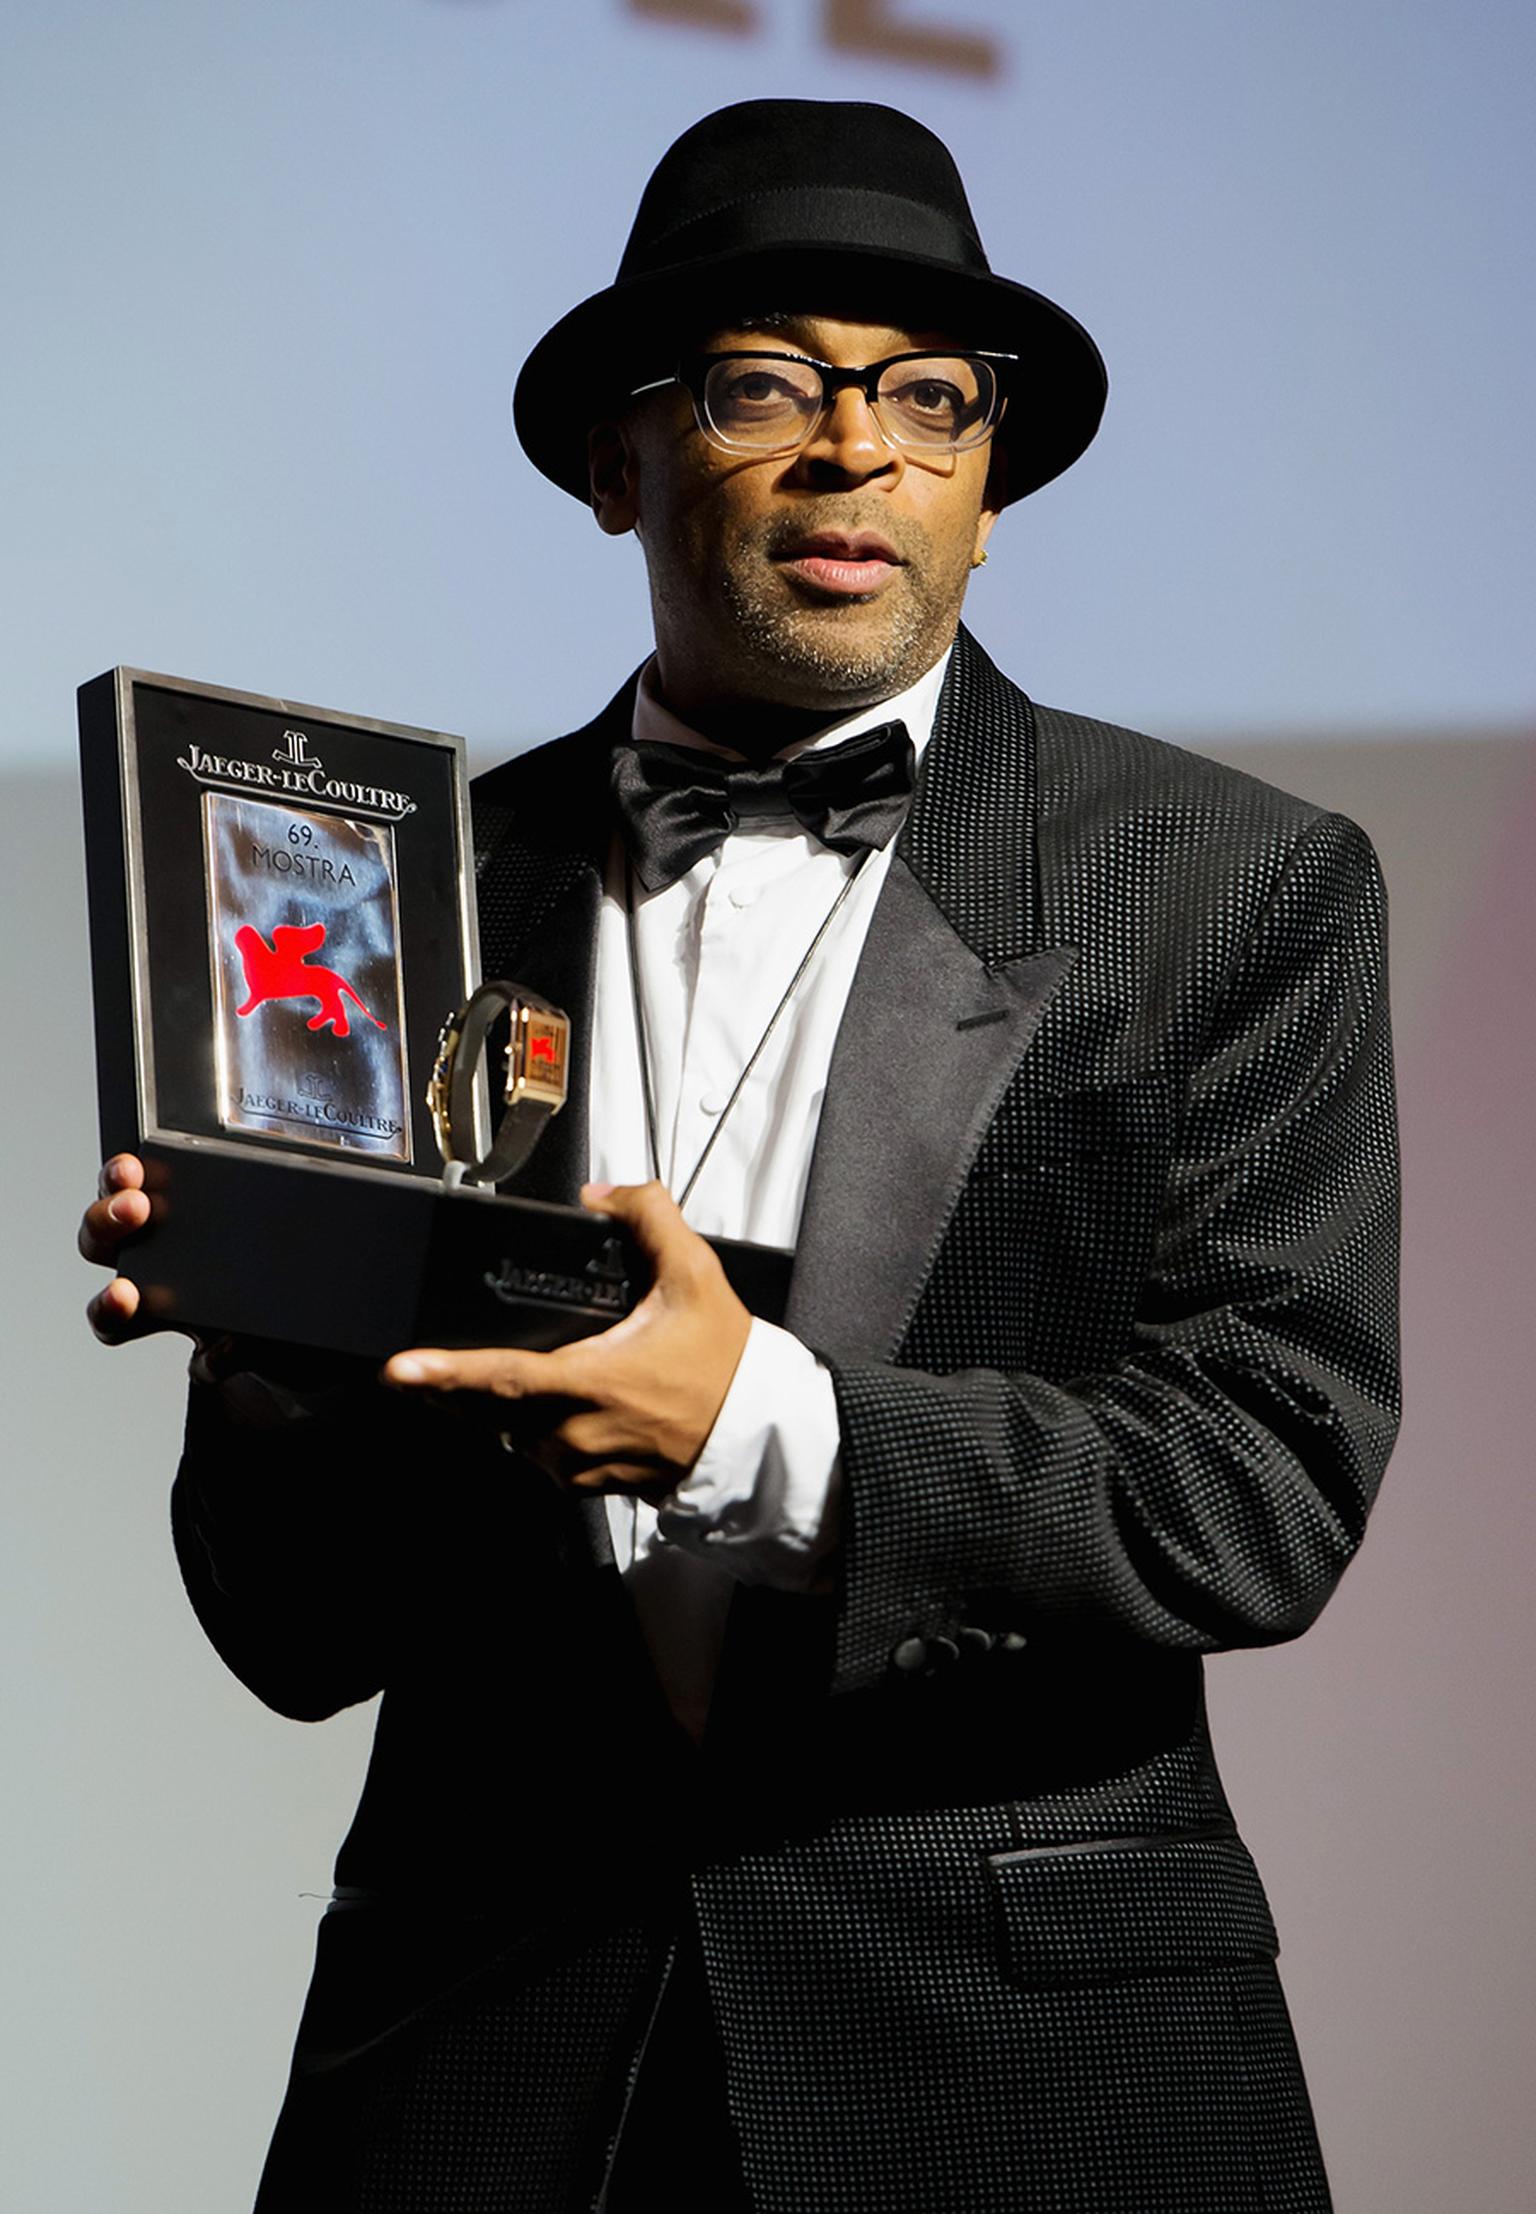 JLC-Director-Spike-Lee-speaks-on-stage-as-he-receives-the-Jaeger-Le-Coultre-Glory-To-The-Filmmaker-Award-during-the-69th-Venice-Film-Festival.jpg